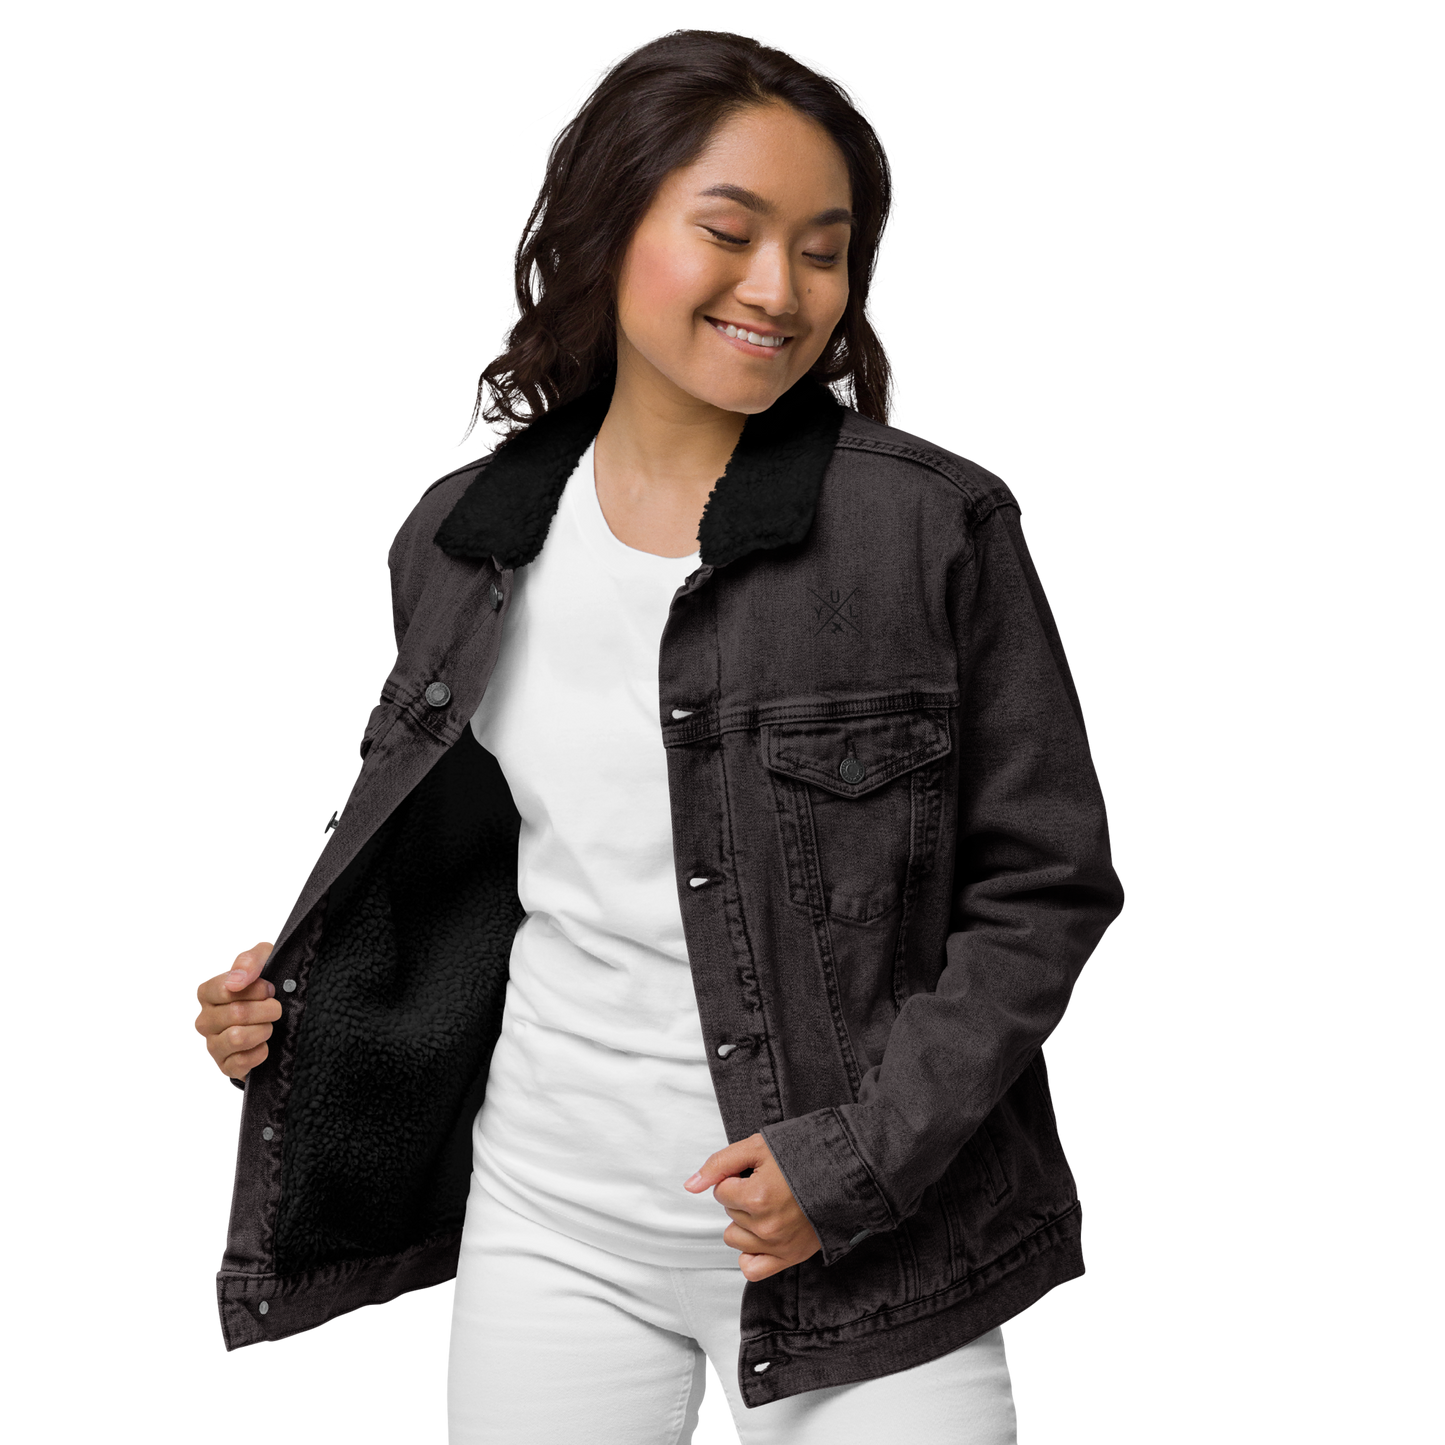 YHM Designs - YUL Montreal Denim Sherpa Jacket - Crossed-X Design with Airport Code and Vintage Propliner - Black & White Embroidery - Image 05